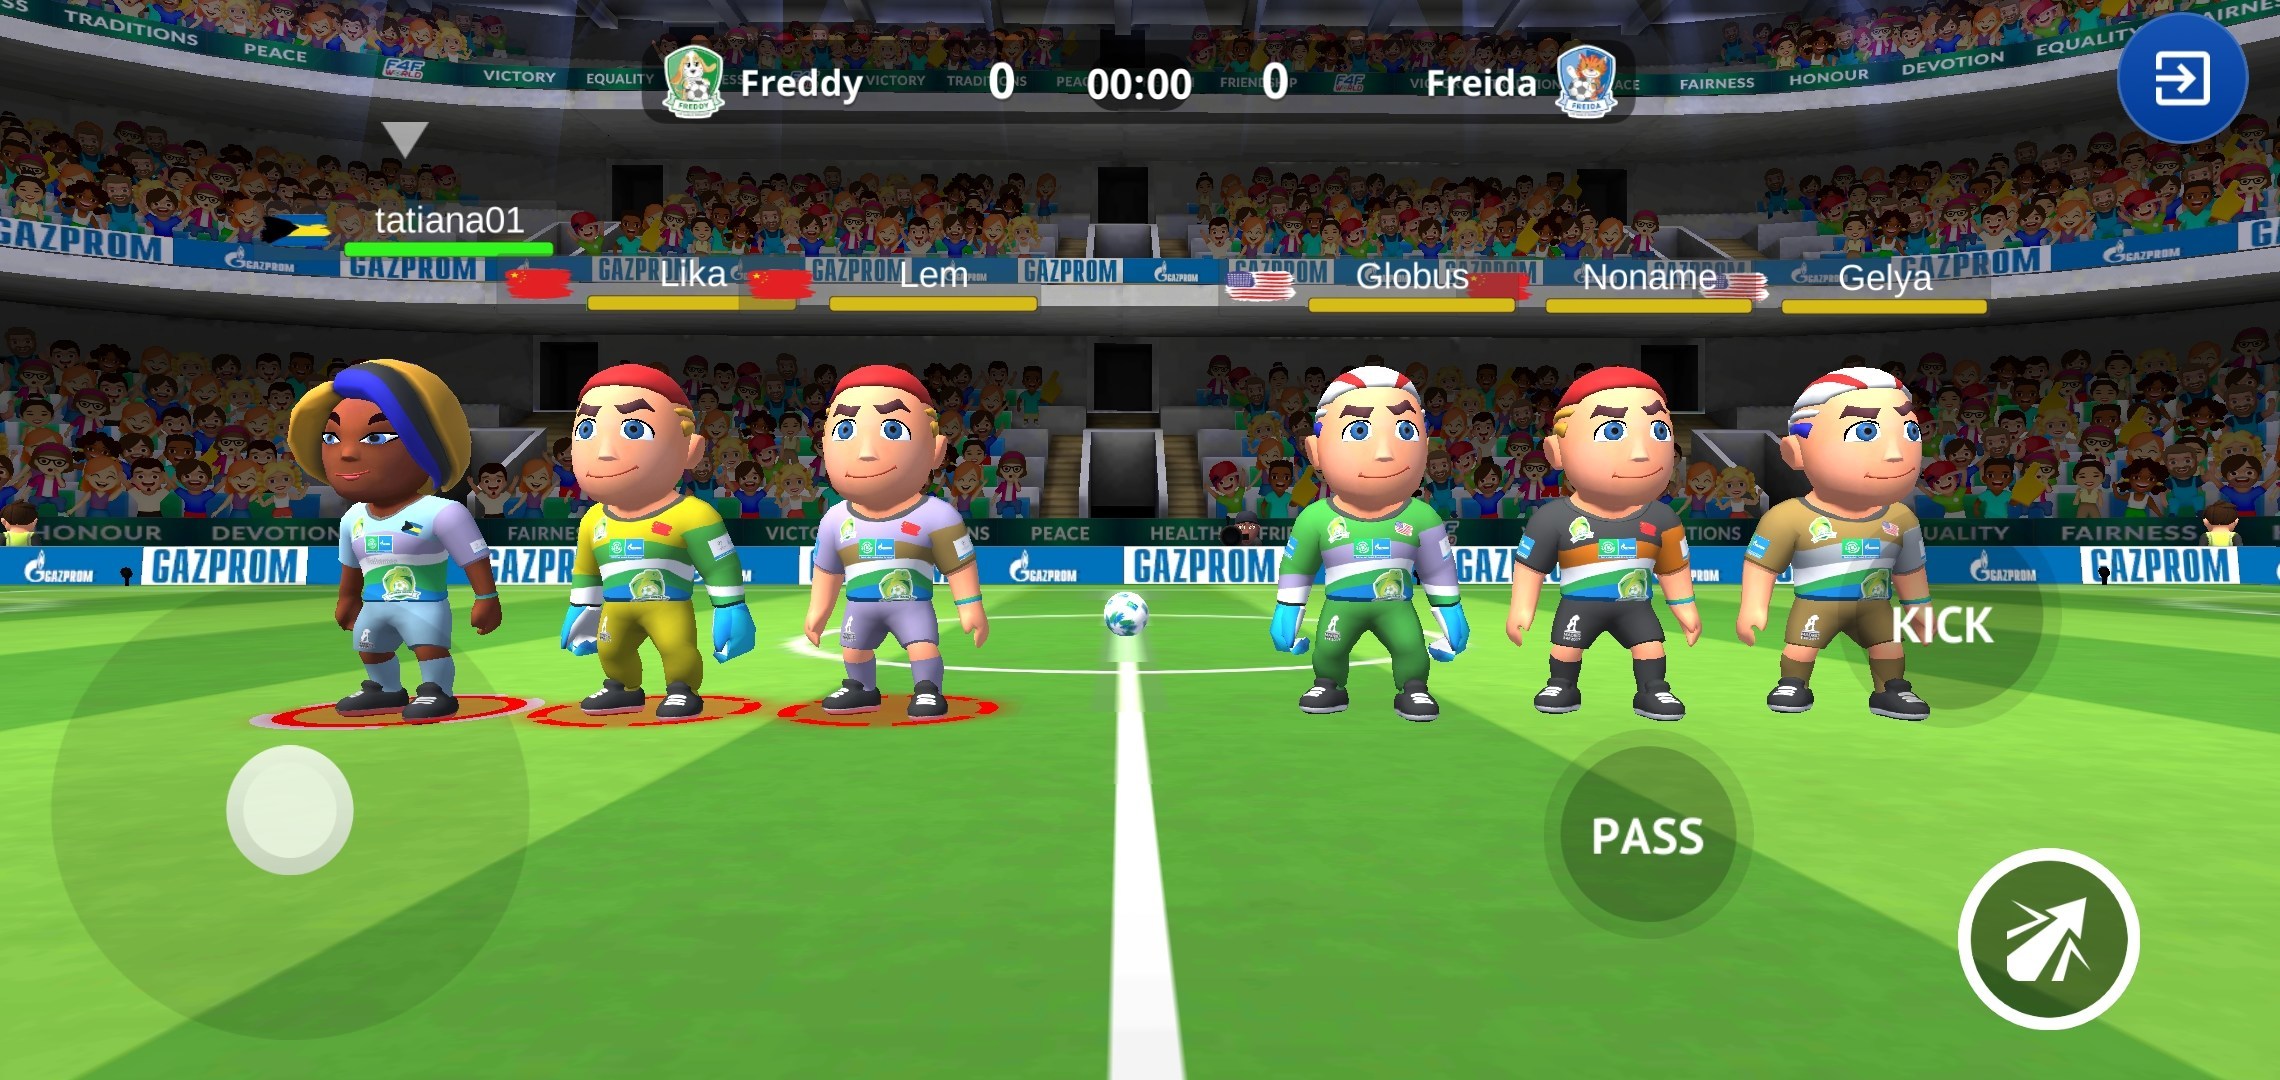 New football simulator Football for Friendship World to be released on World Football Day